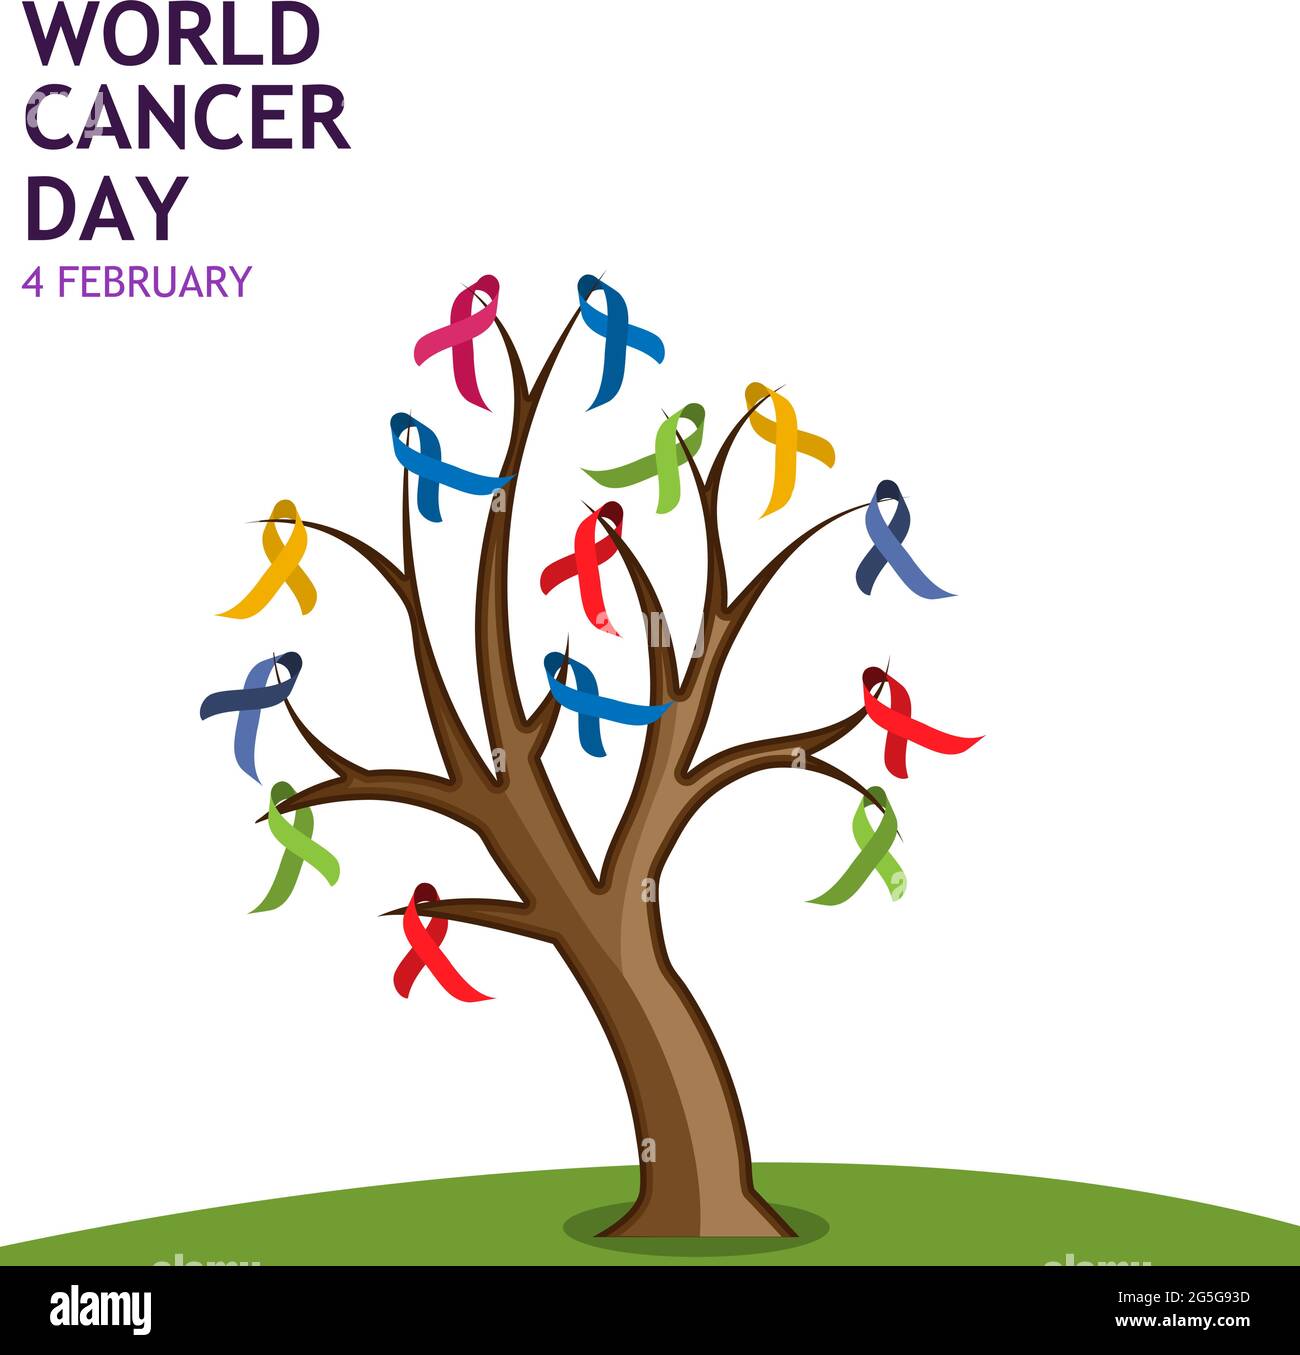 World cancer day 4 february text with ribbon tree. Vector illustration concept for world cancer day Stock Vector